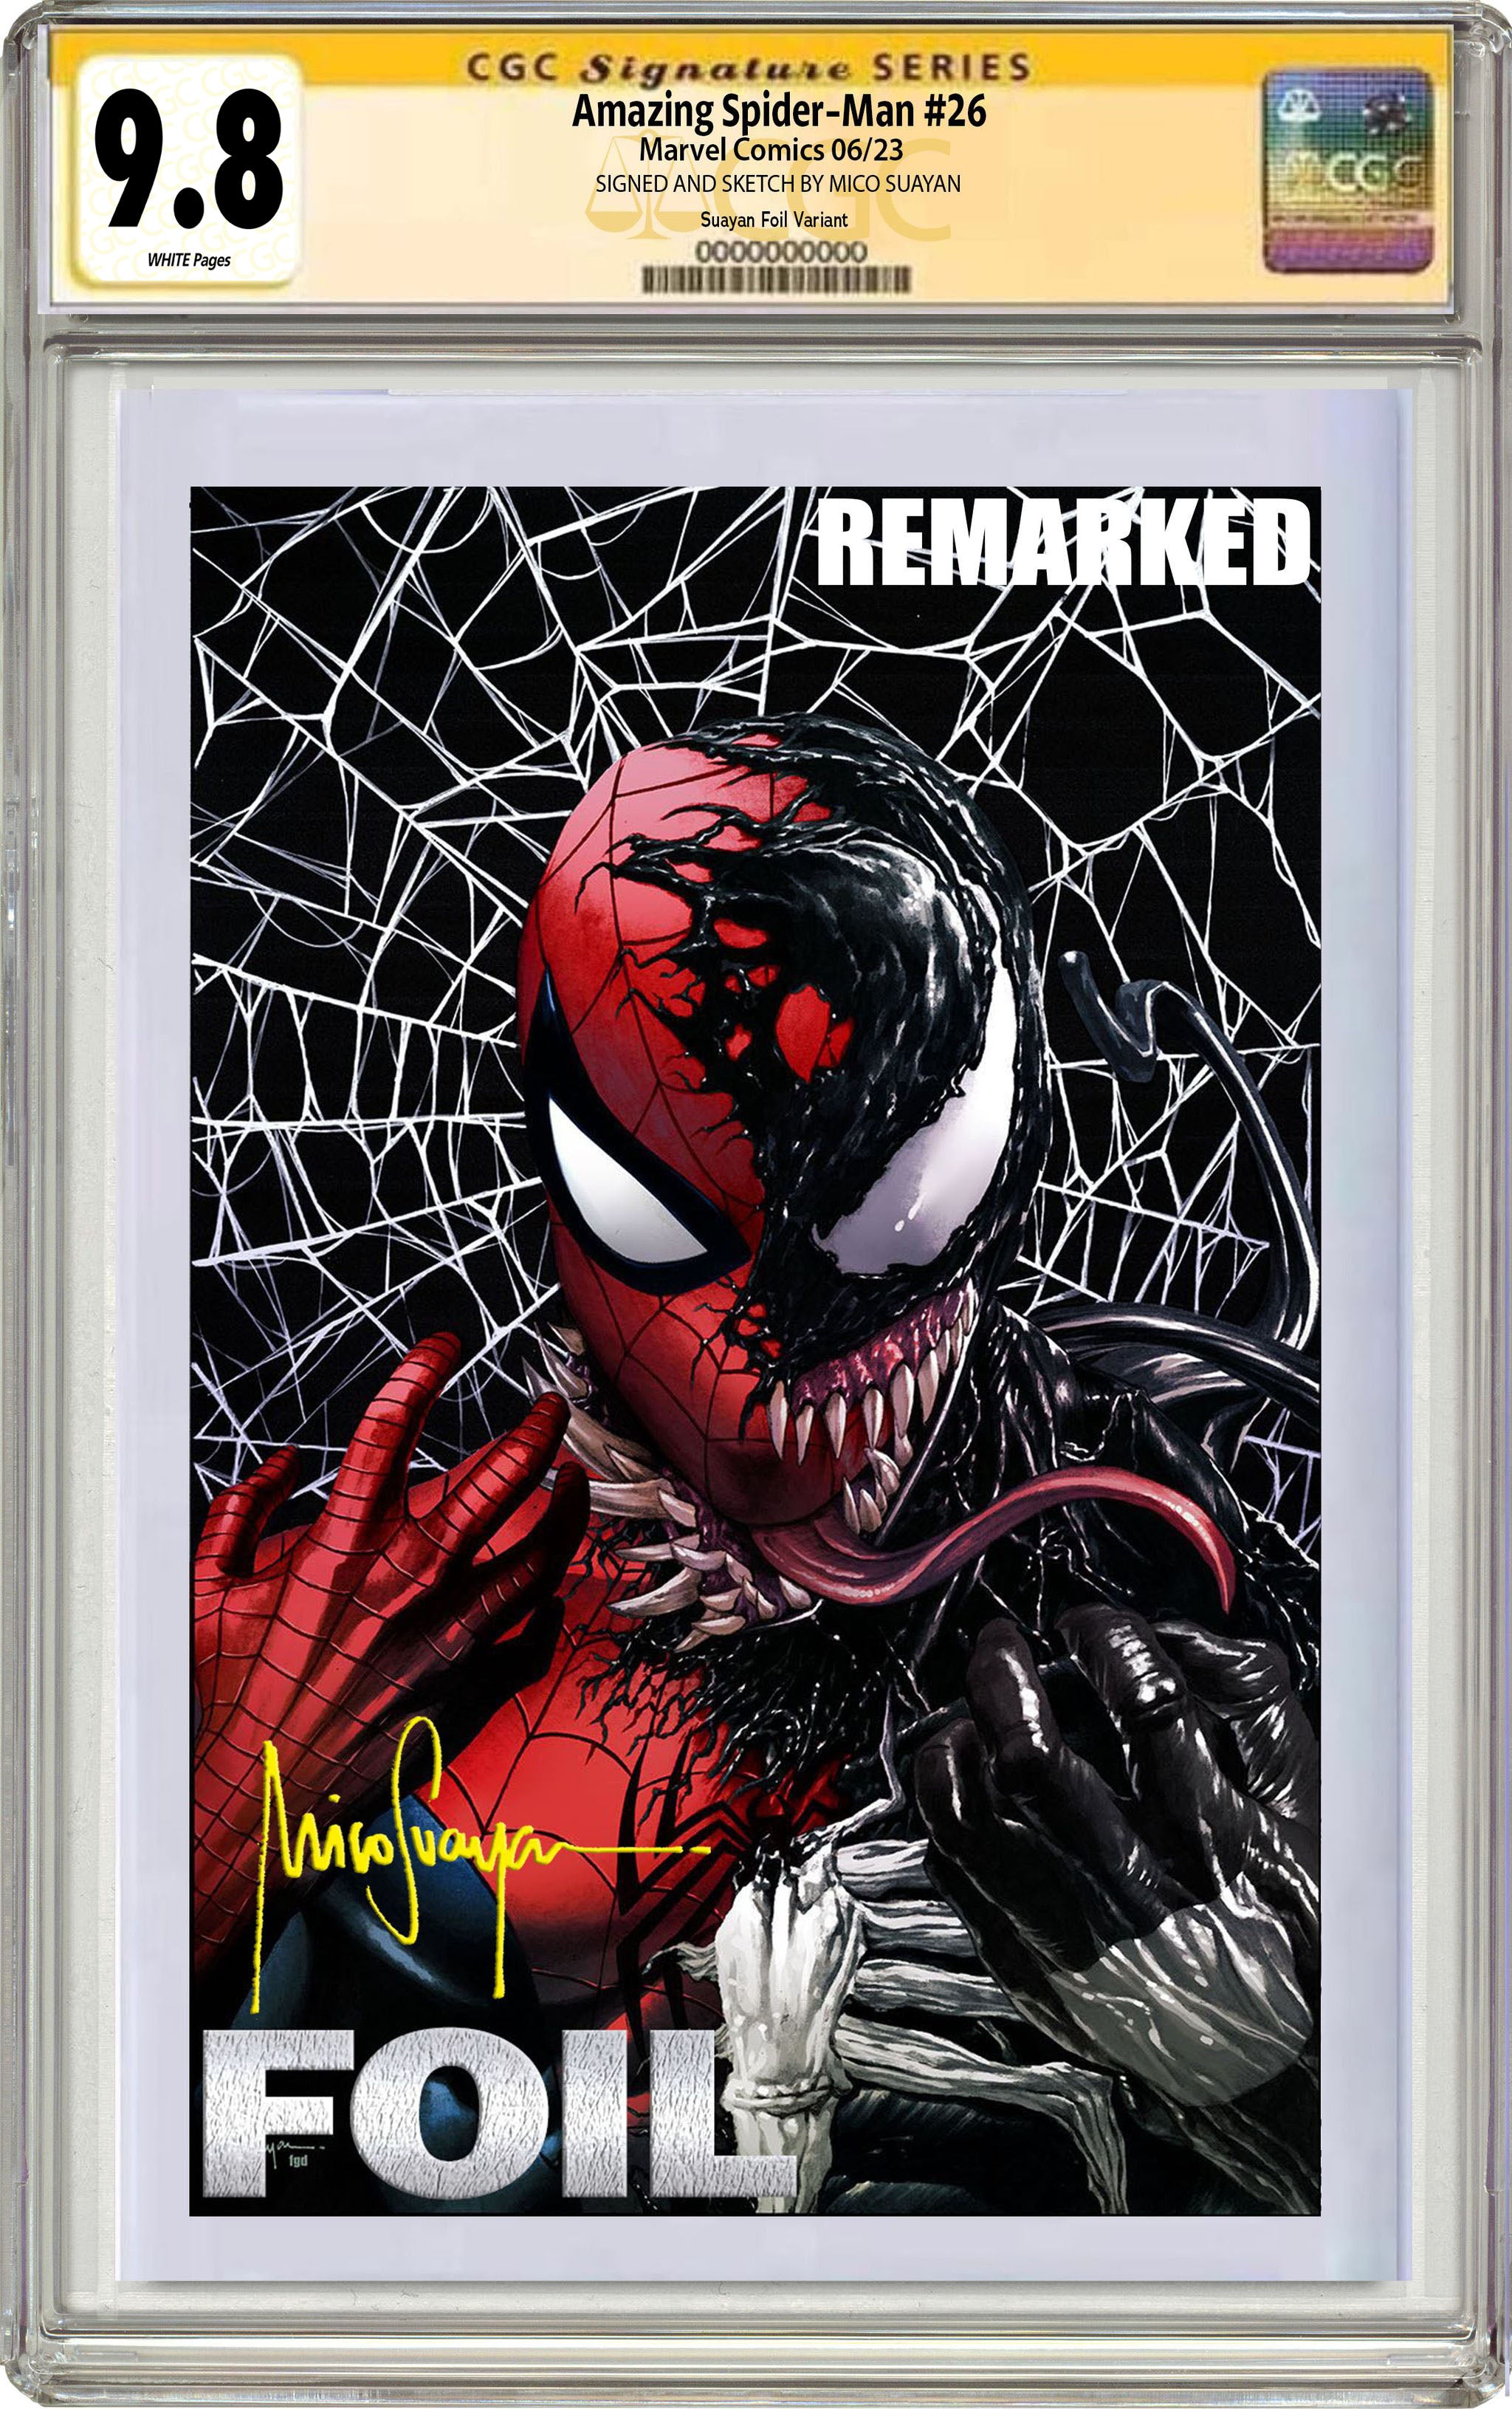 AMAZING SPIDER-MAN 26 MICO SUAYAN EXCLUSIVE VIRGIN FOIL VARIANT OPTIONS